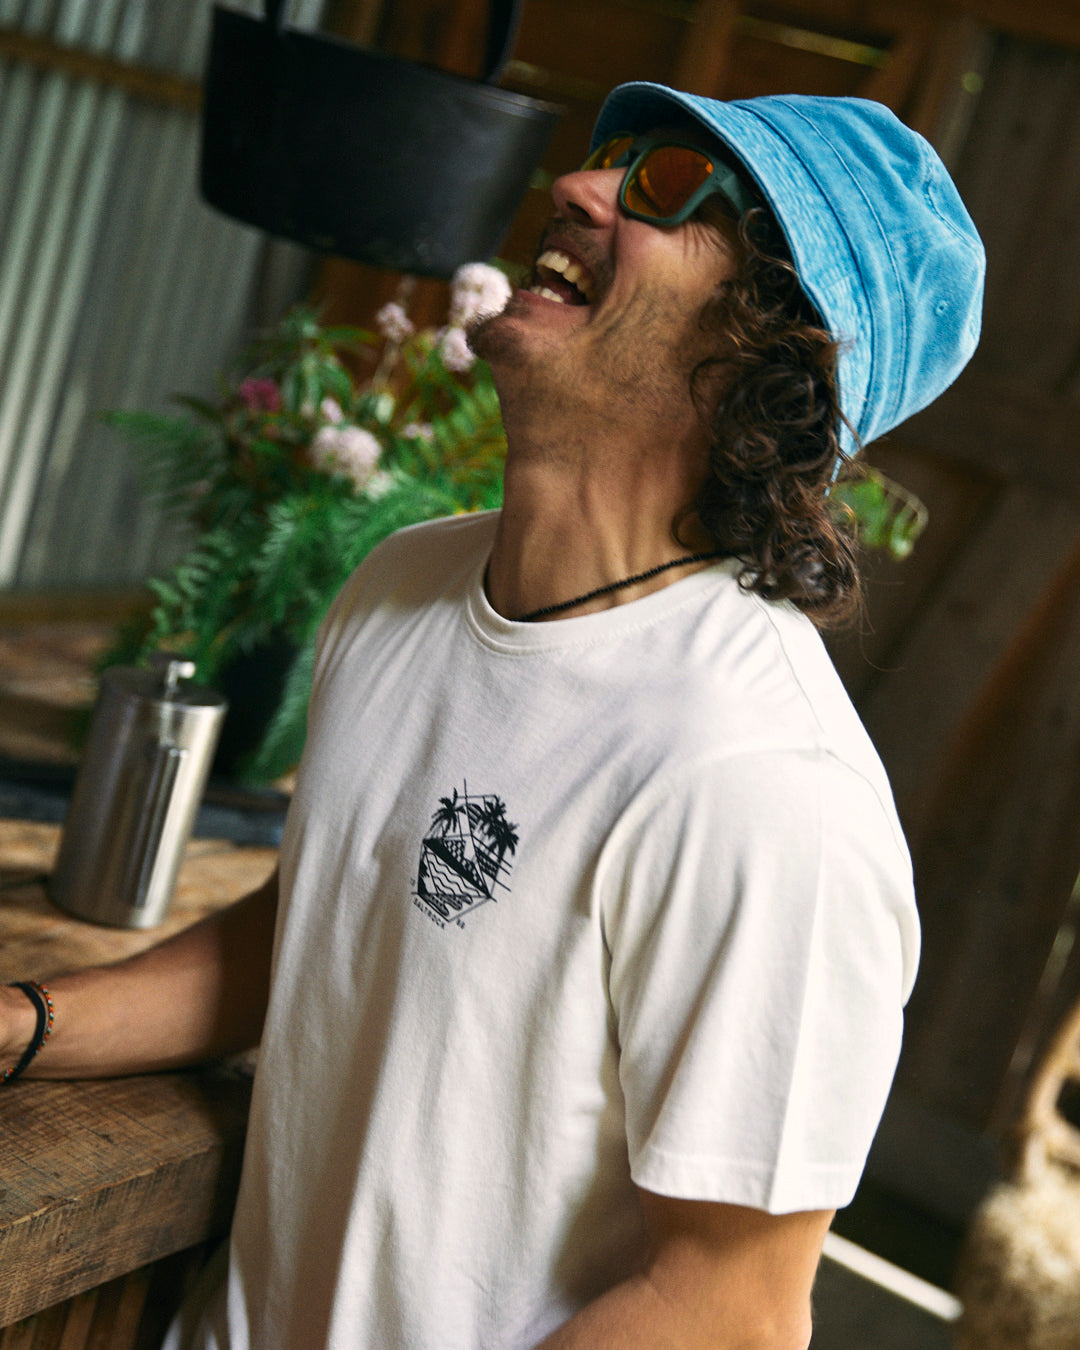 A man wearing sunglasses and a blue hat laughs while standing near a wooden counter with a metal bottle and flowers in the background. He is dressed in the white Saltrock Geo Palms Men's T-Shirt, made from 100% cotton.